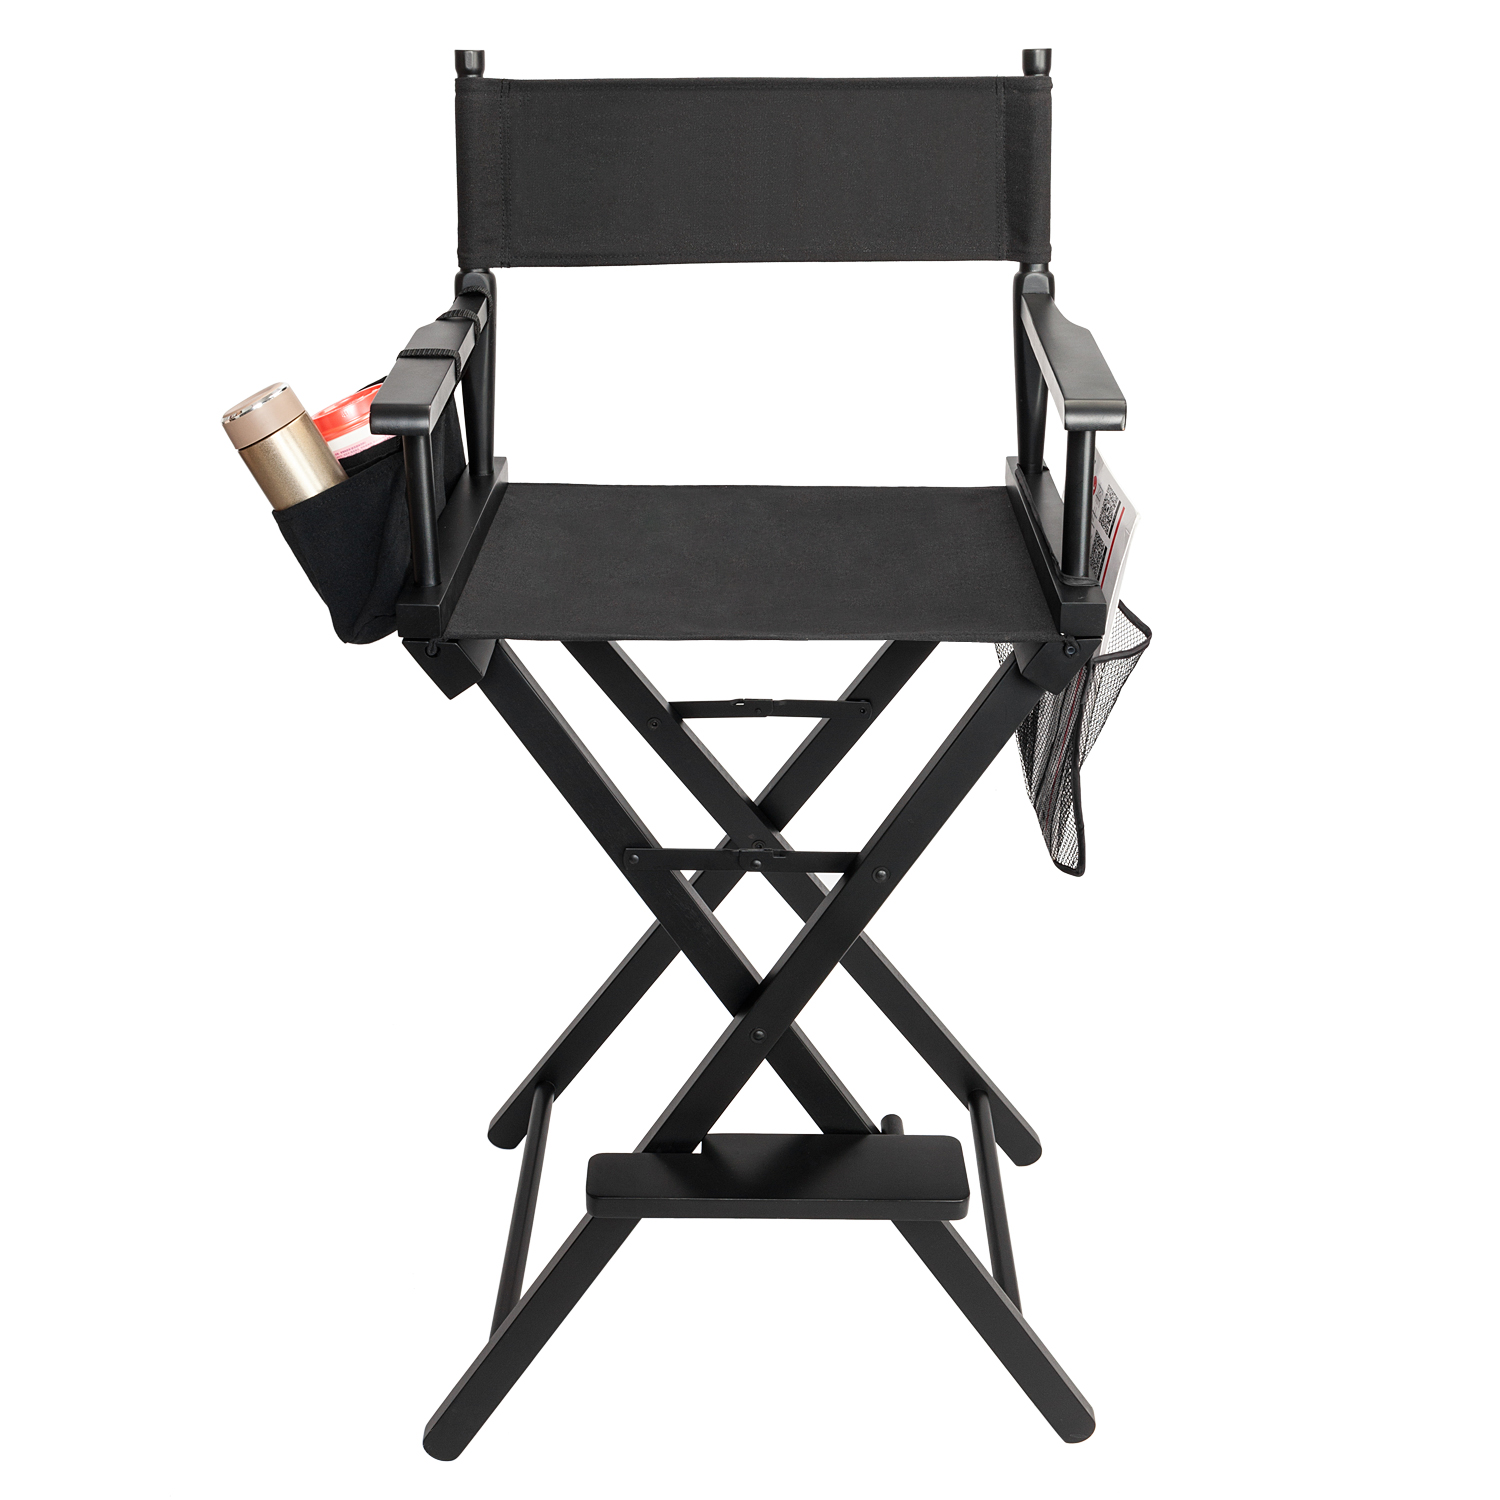 UBesGoo Hot Directors Chair 30" Canvas Tall Seat Black Wood Makeup Folding Chair - image 2 of 10